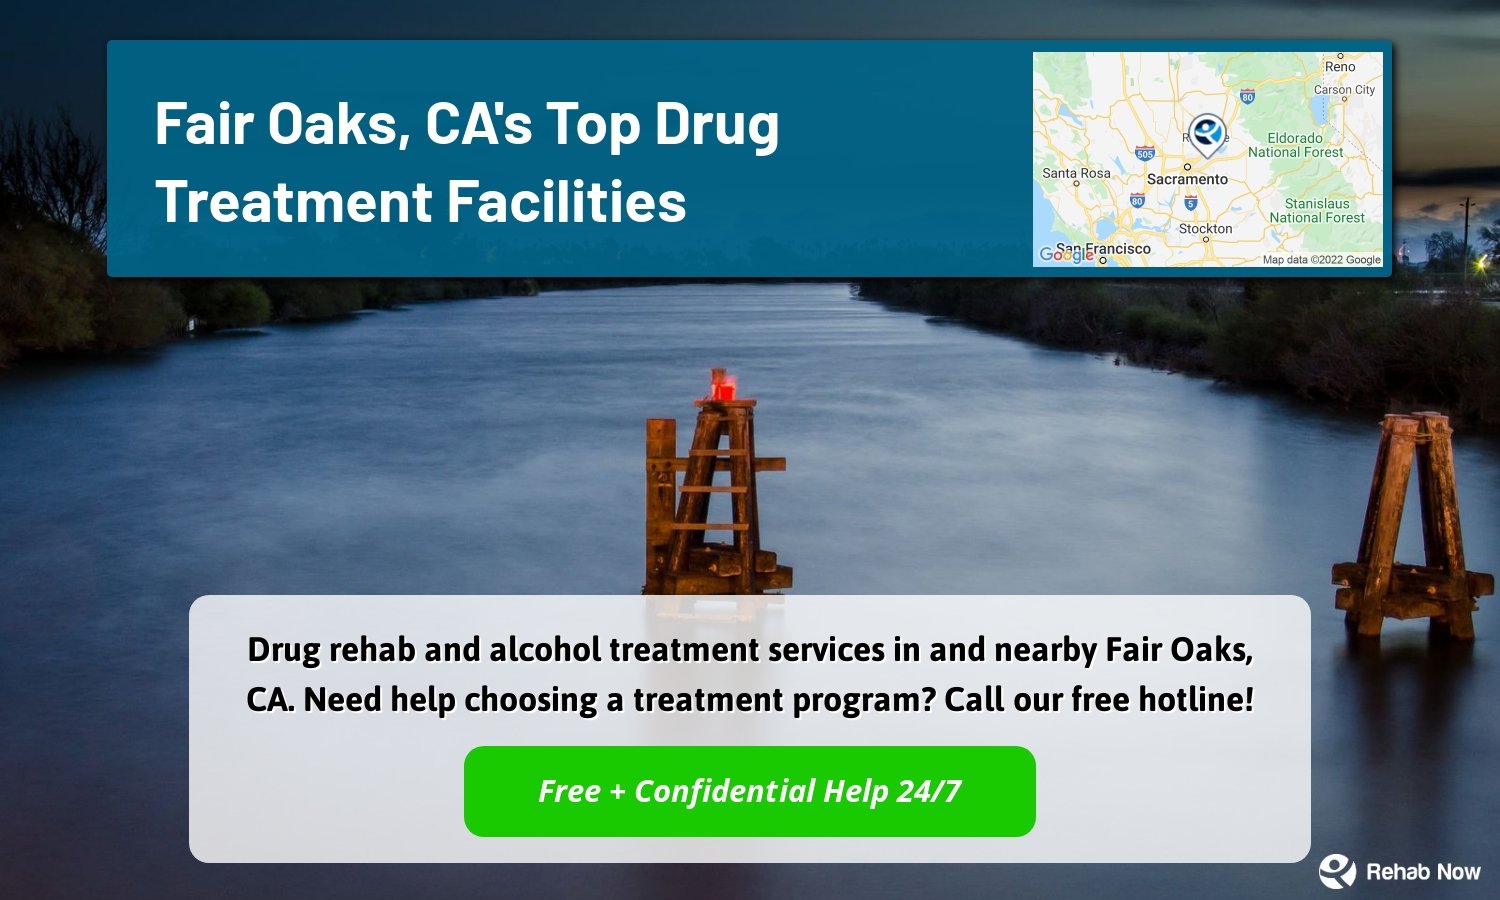 Drug rehab and alcohol treatment services in and nearby Fair Oaks, CA. Need help choosing a treatment program? Call our free hotline!